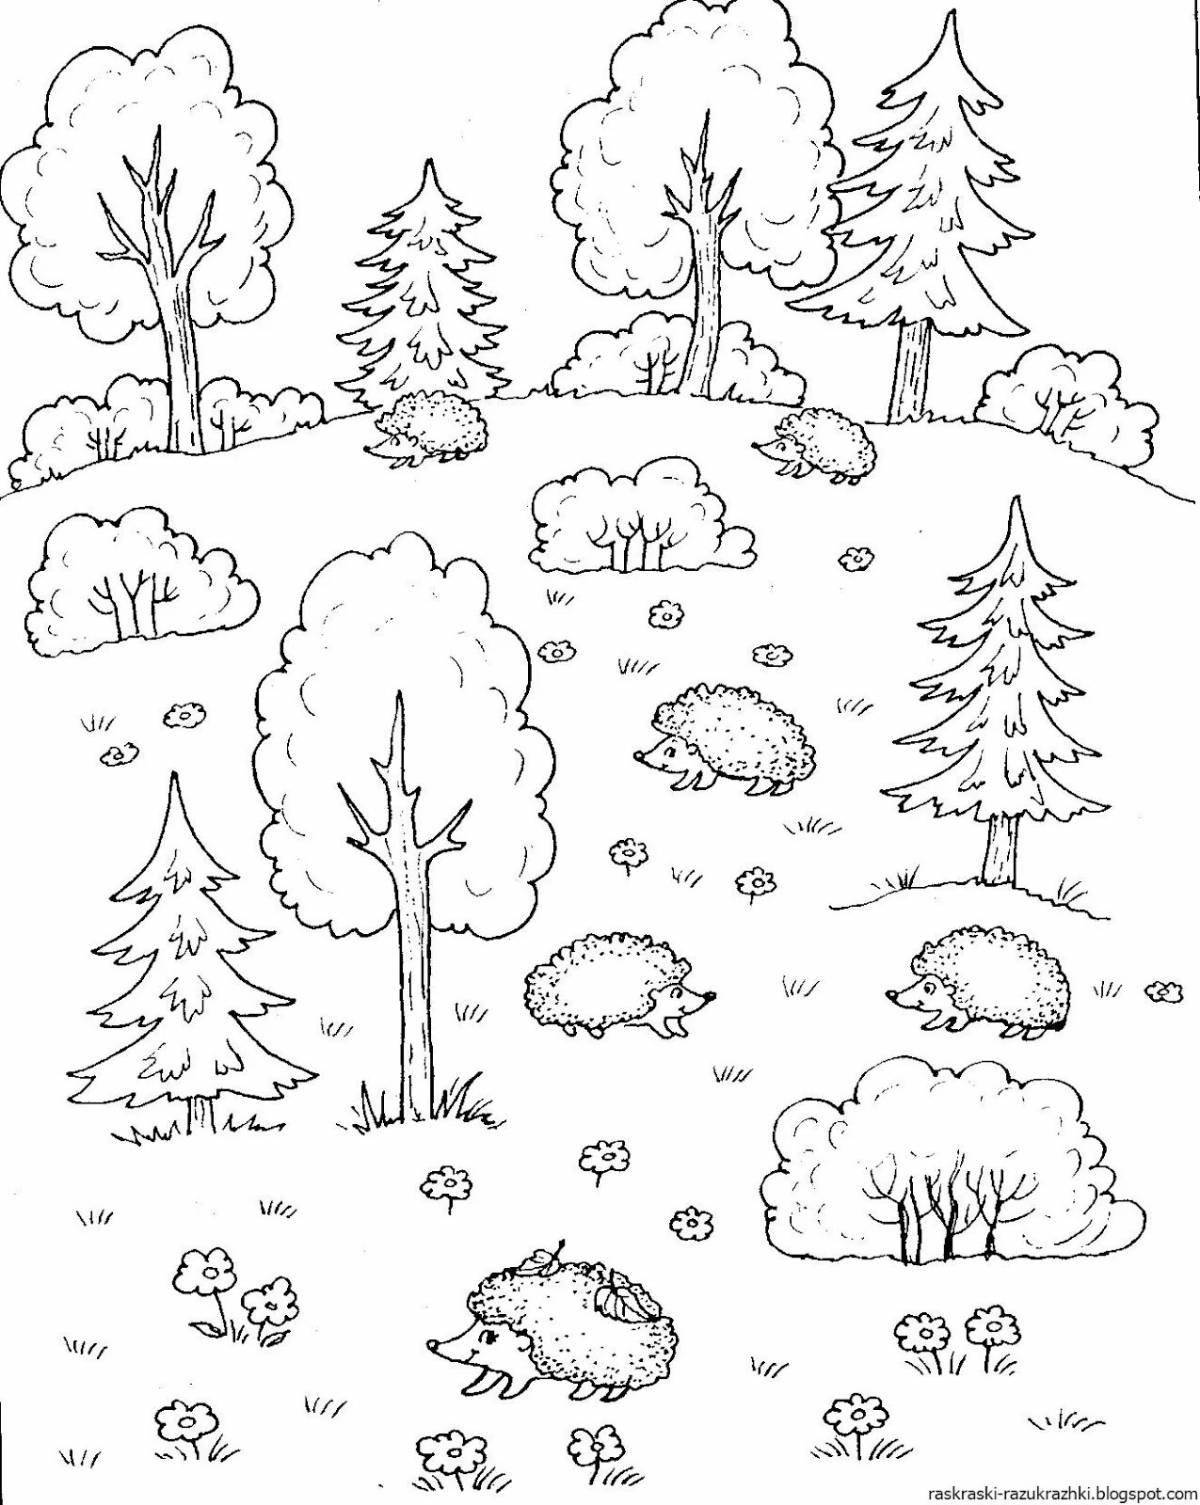 Amazing tree coloring book for 6-7 year olds